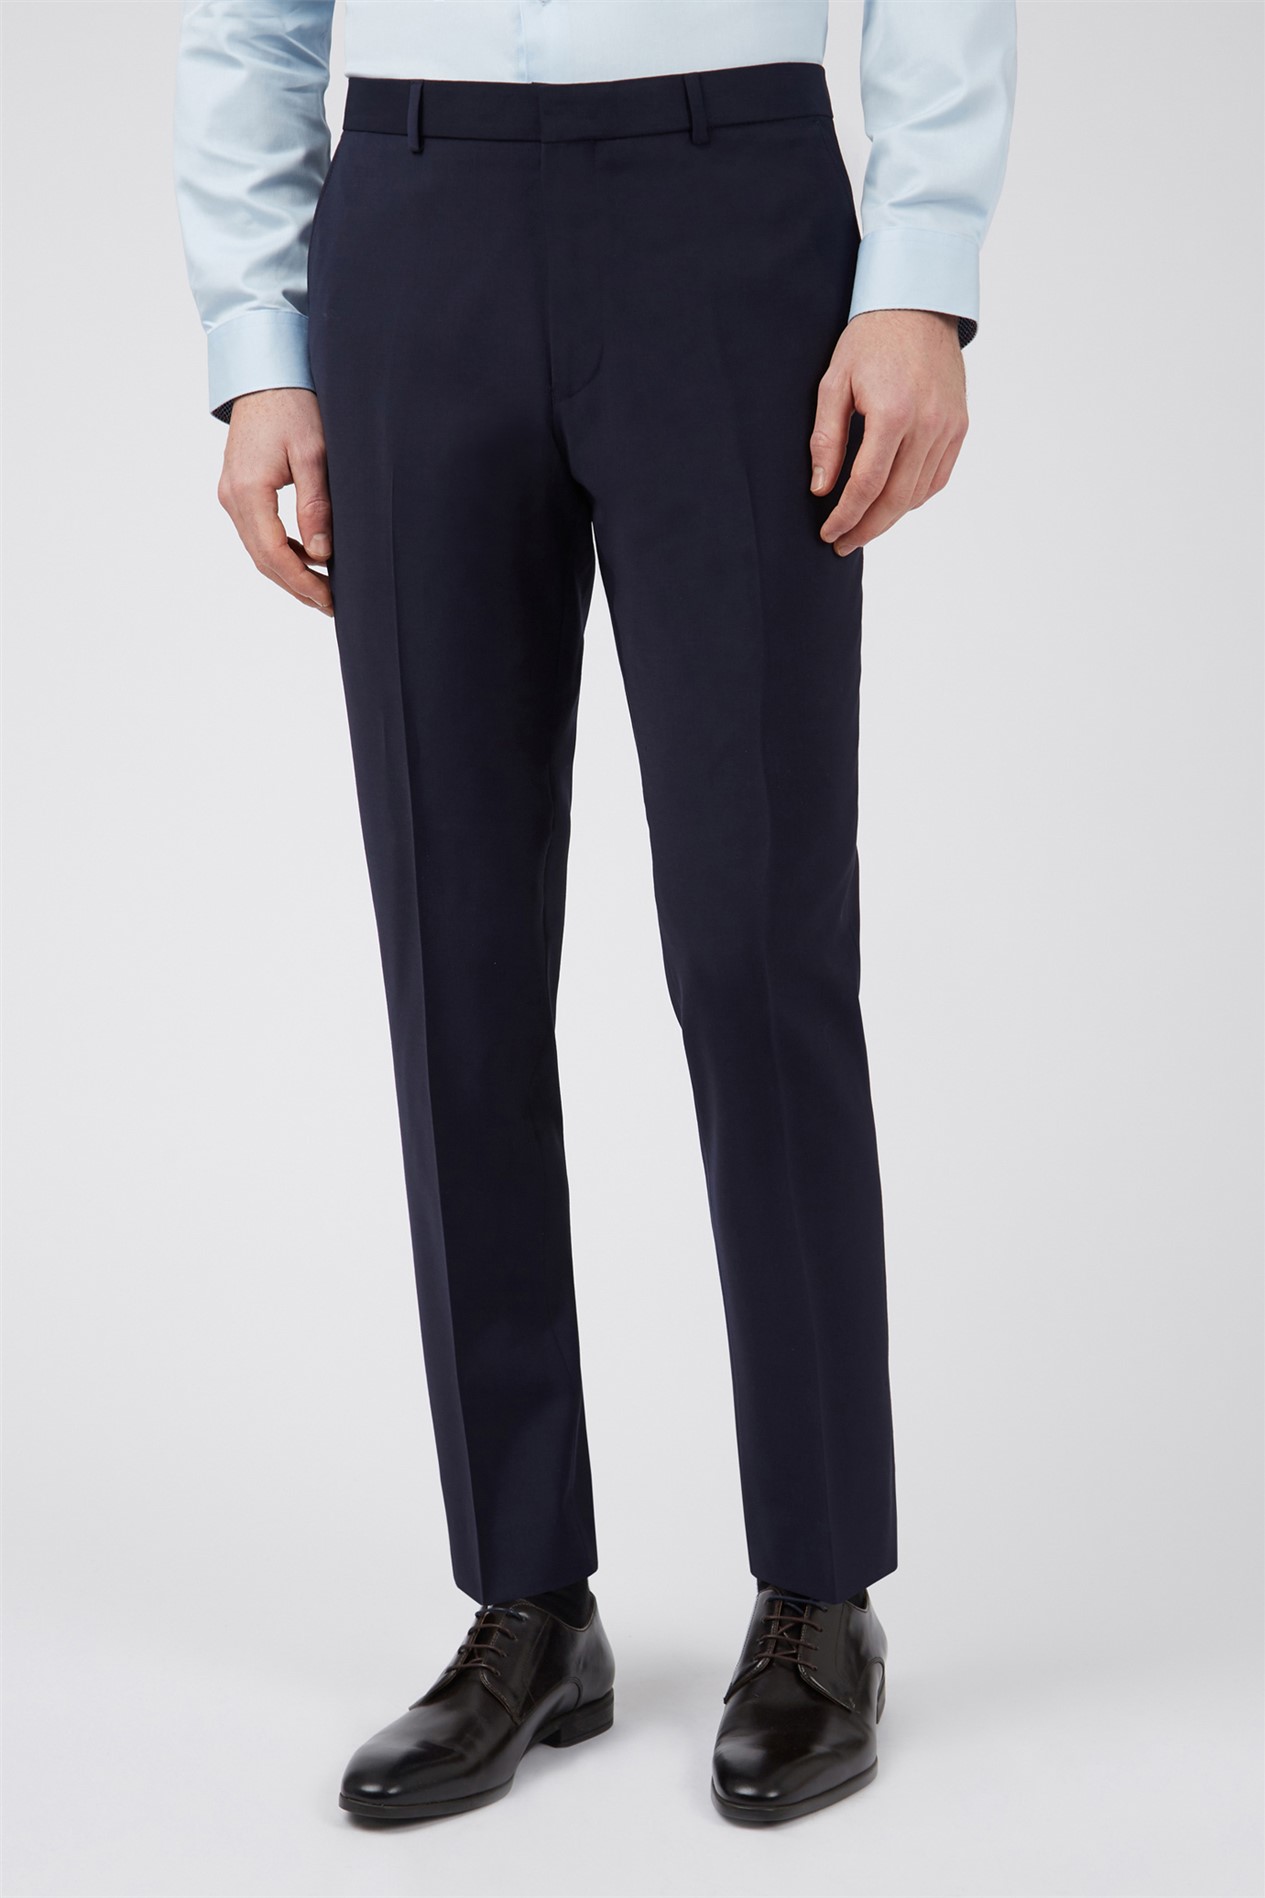 Ted Baker Navy Slim Fit 3 Piece Suit - Tom Murphy's Formal and Menswear